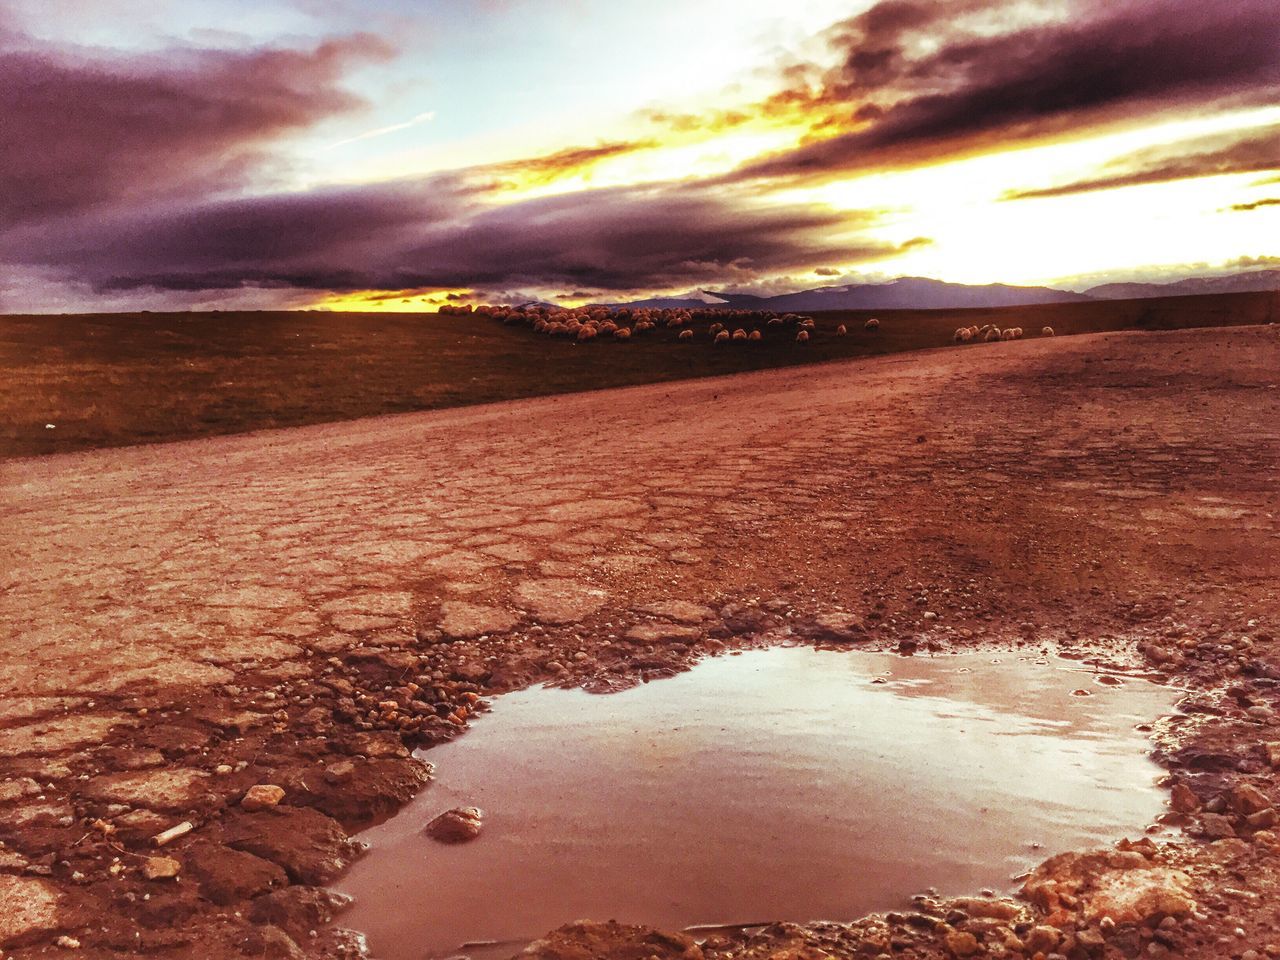 REFLECTION OF SKY ON PUDDLE AT SUNSET